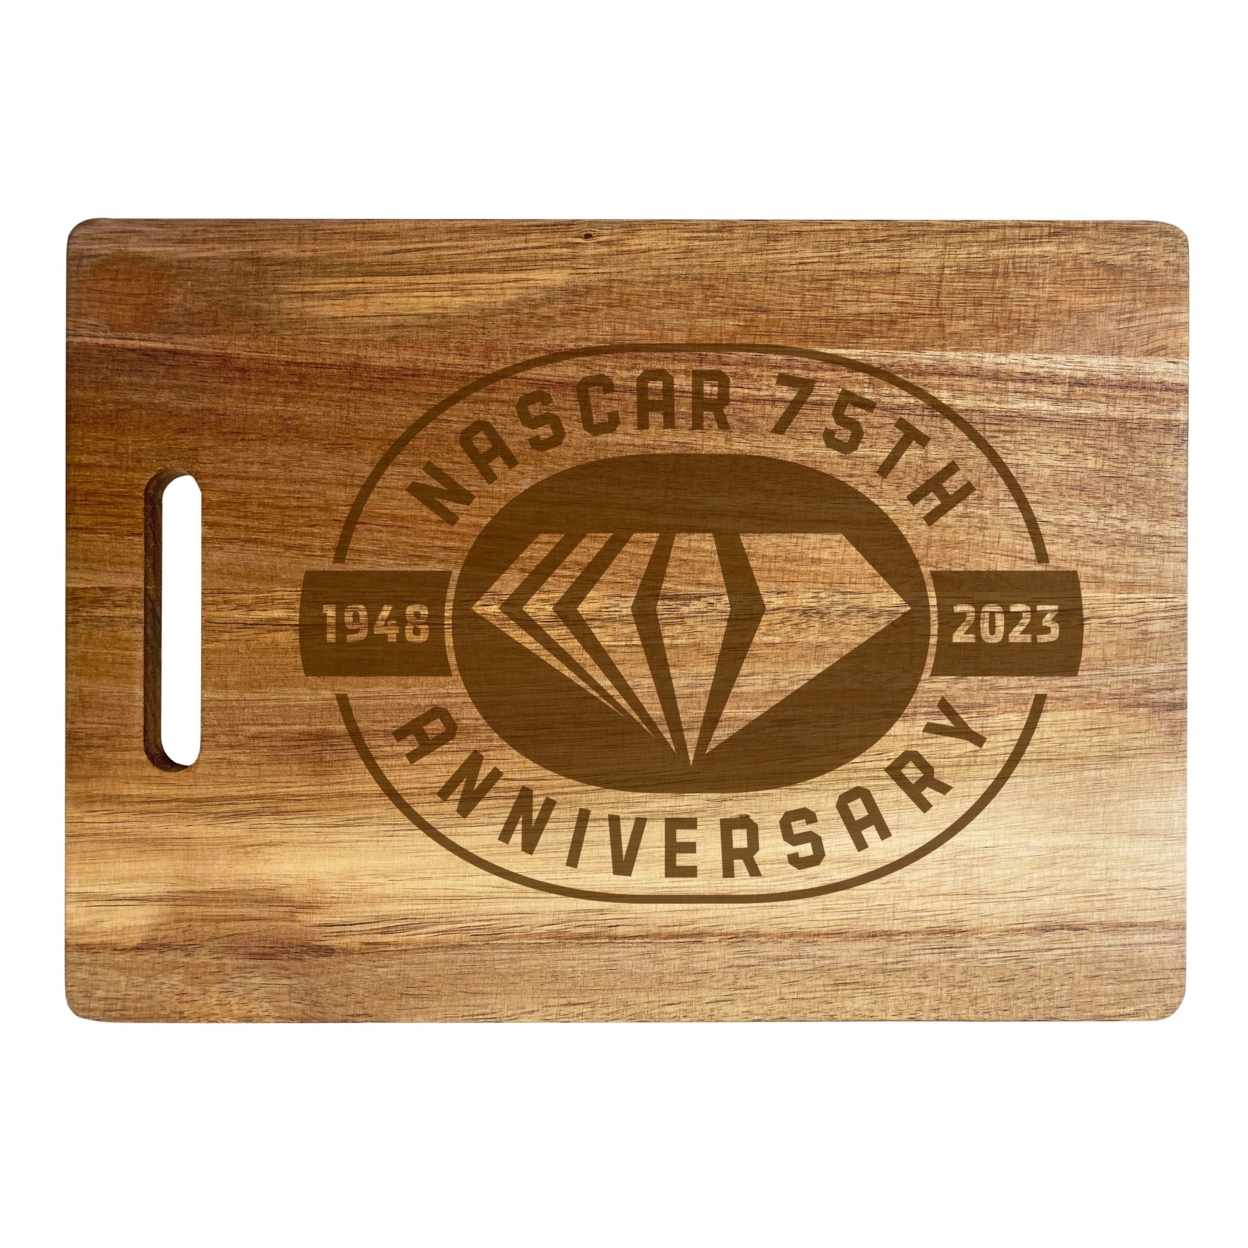 NASCAR 75 Anniversary Officially Licensed Engraved Wooden Cutting Board